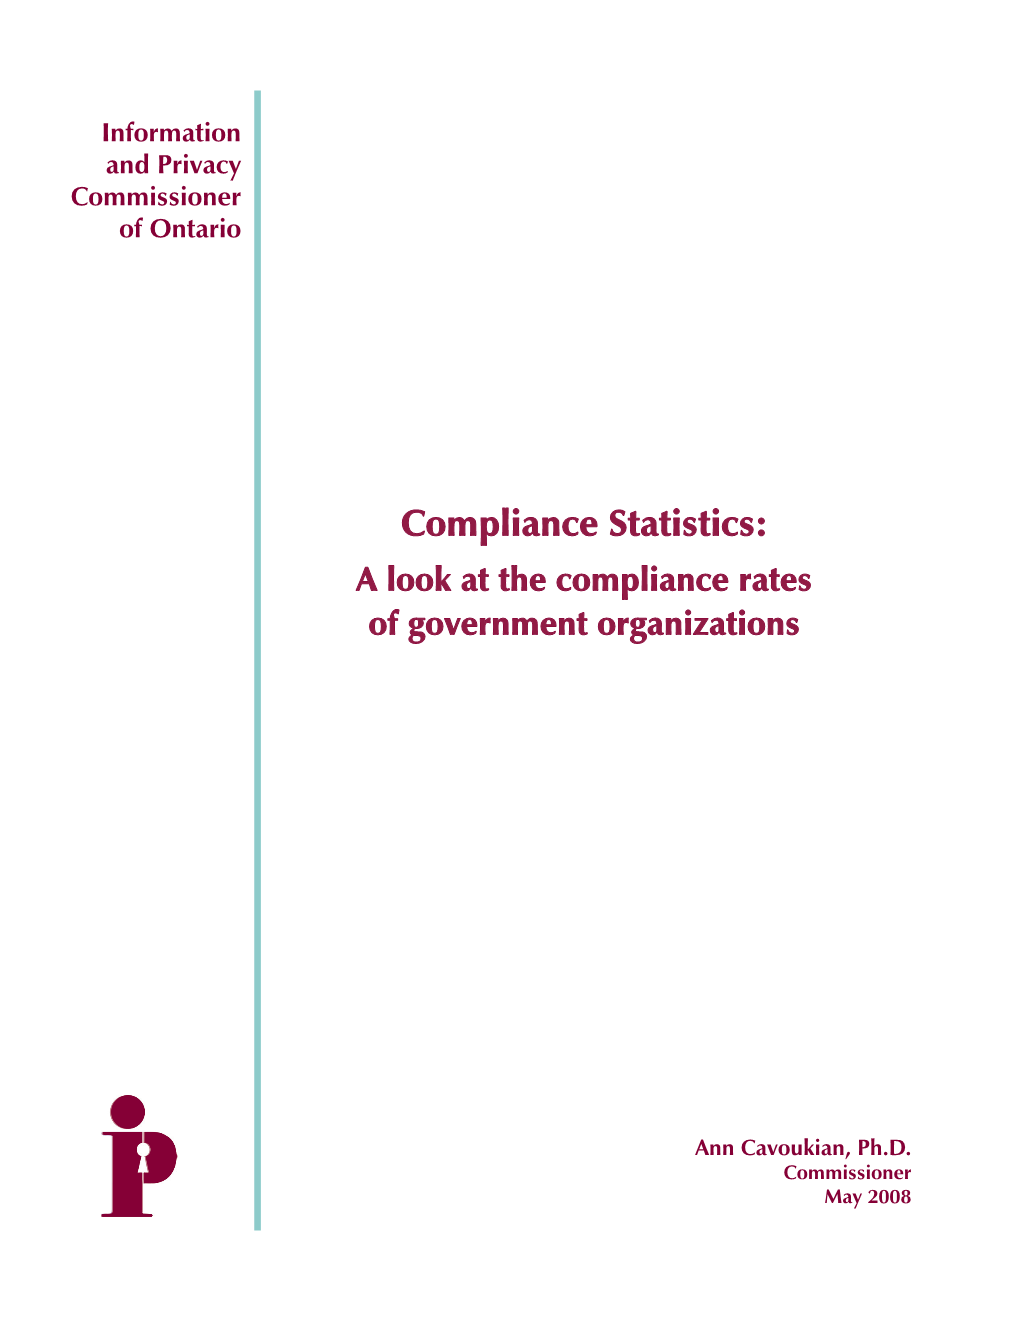 Compliance Statistics: a Look at the Compliance Rates of Government Organizations